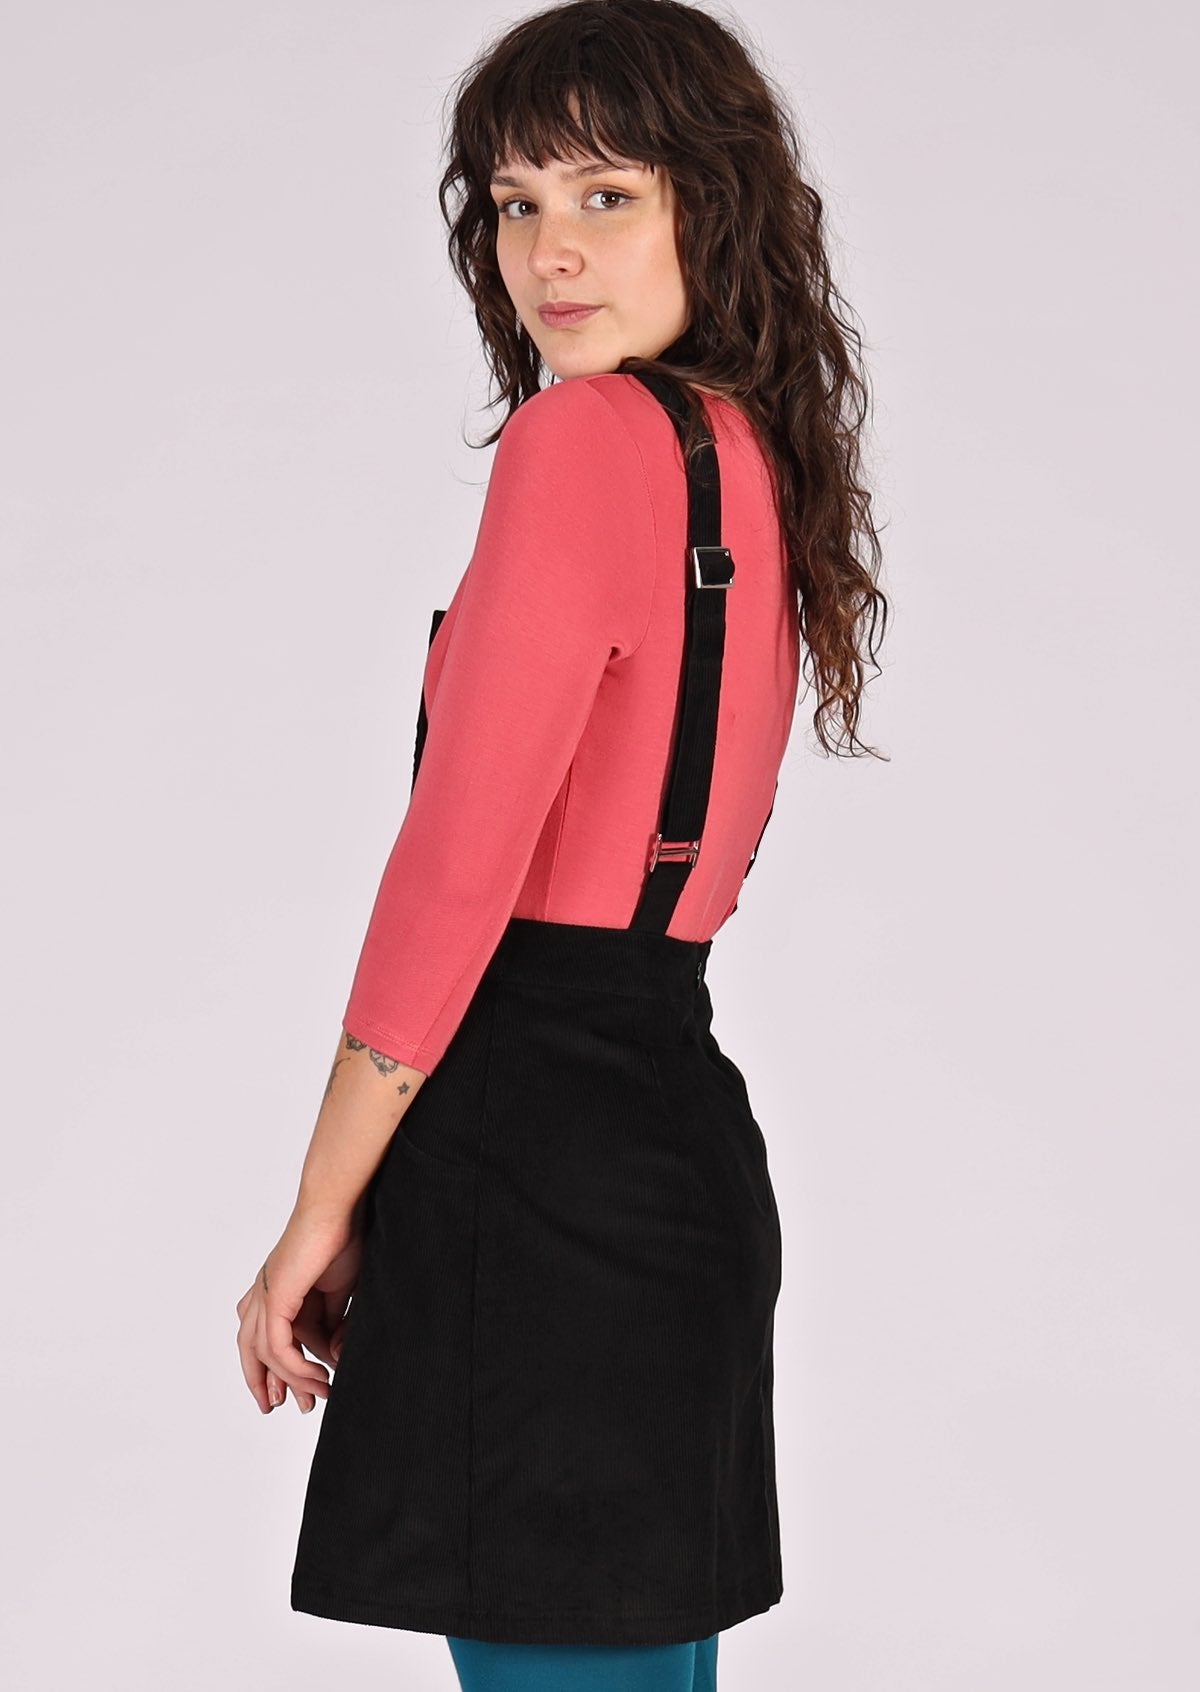 woman wearing black corduroy pinafore over pink top back view